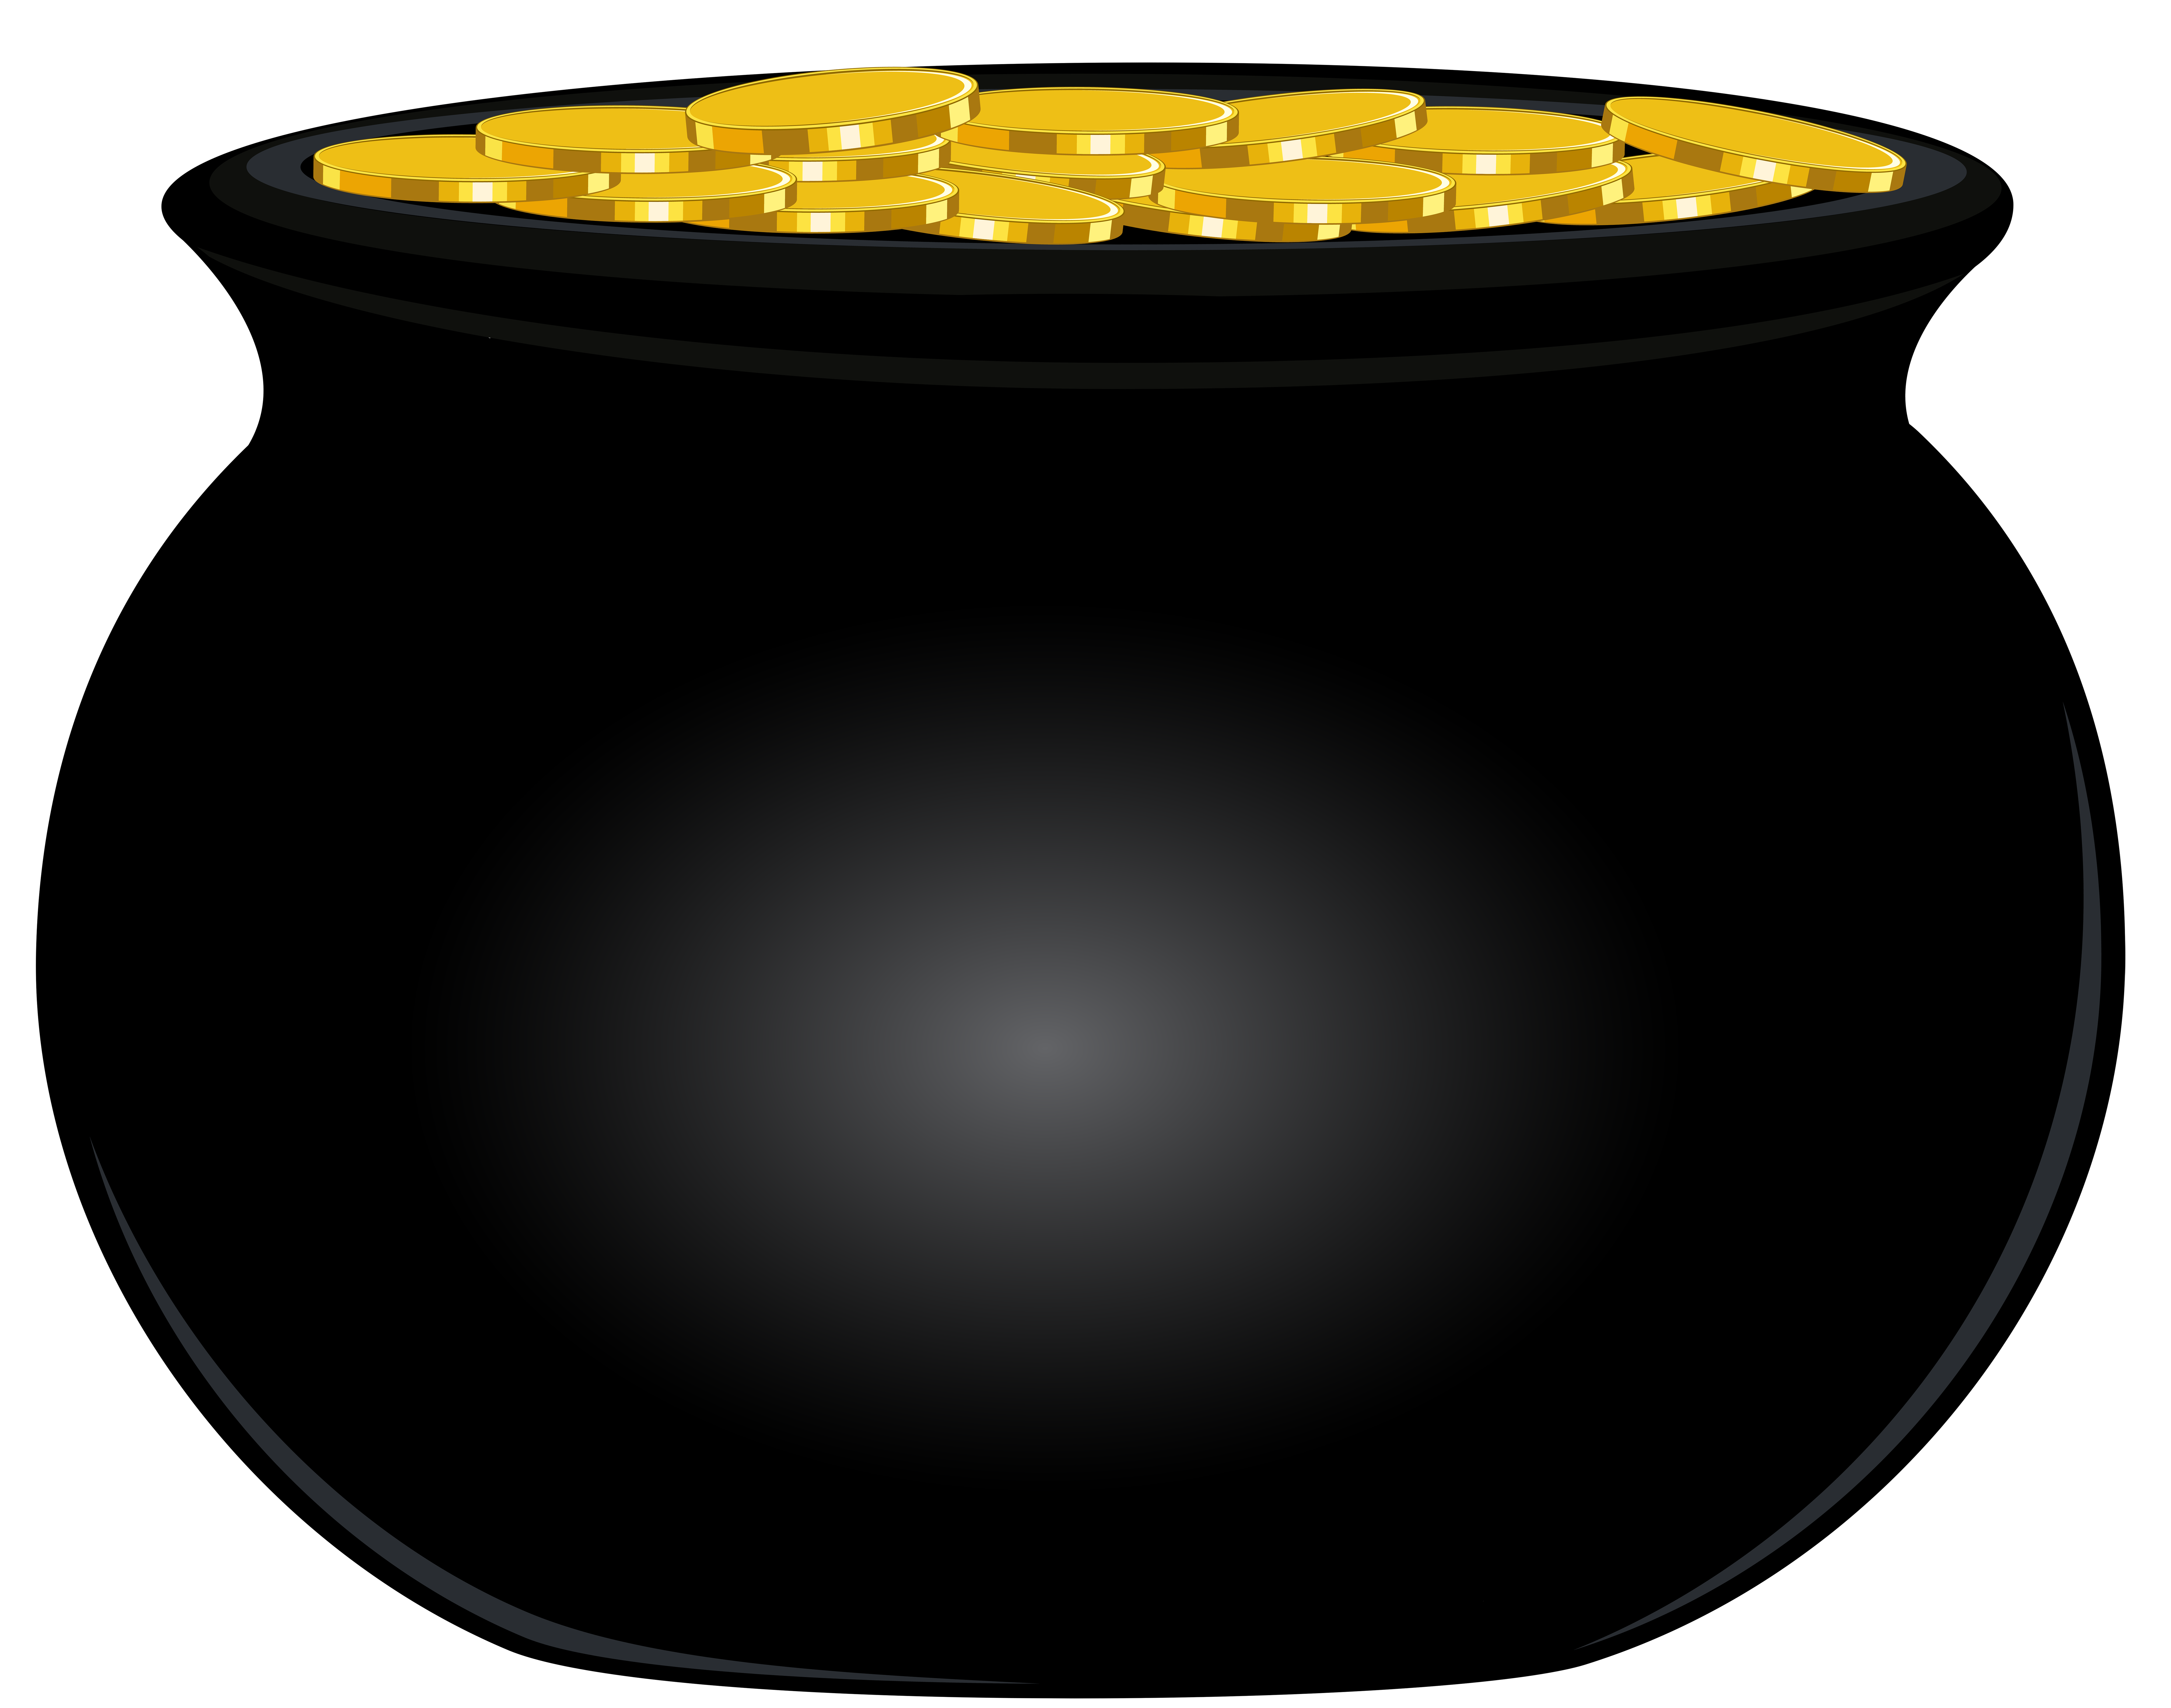 Pot Of Gold Transparent Background #1548271 (License: Personal Use) .